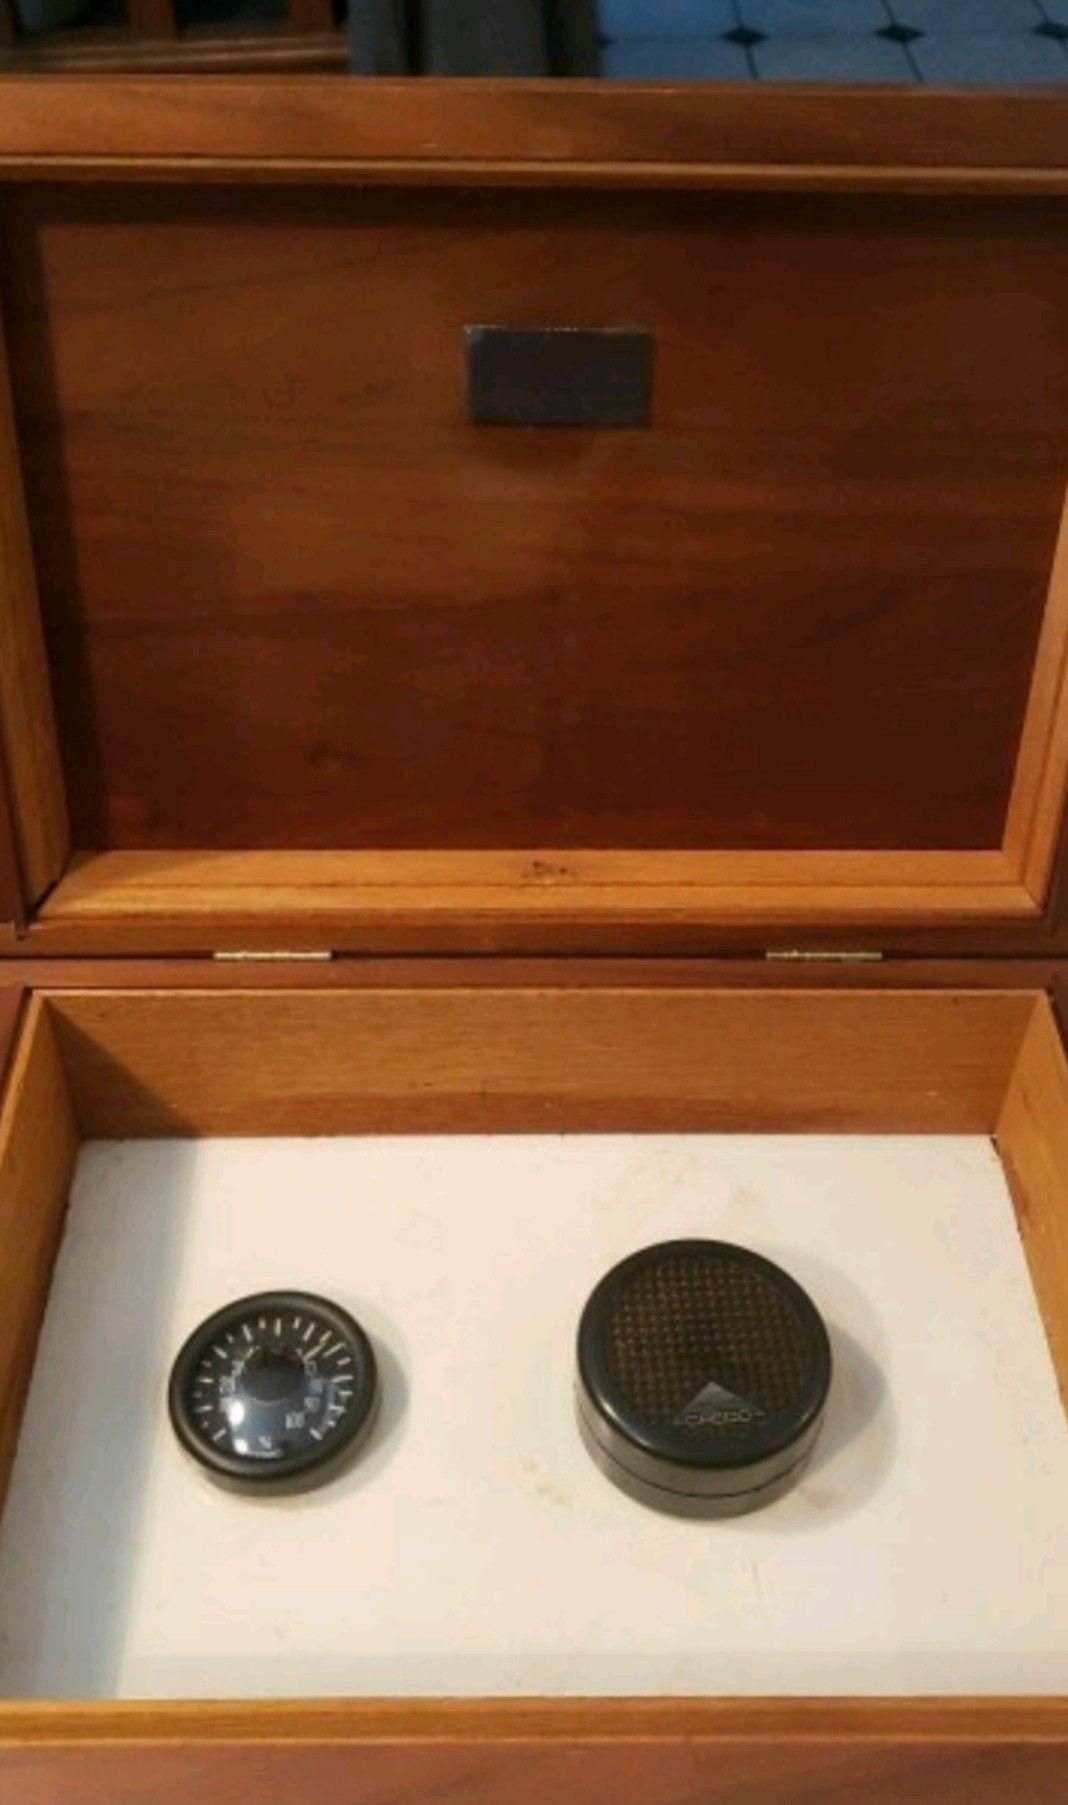 Full sized humidor with a hygrometer and a Credo humidifier